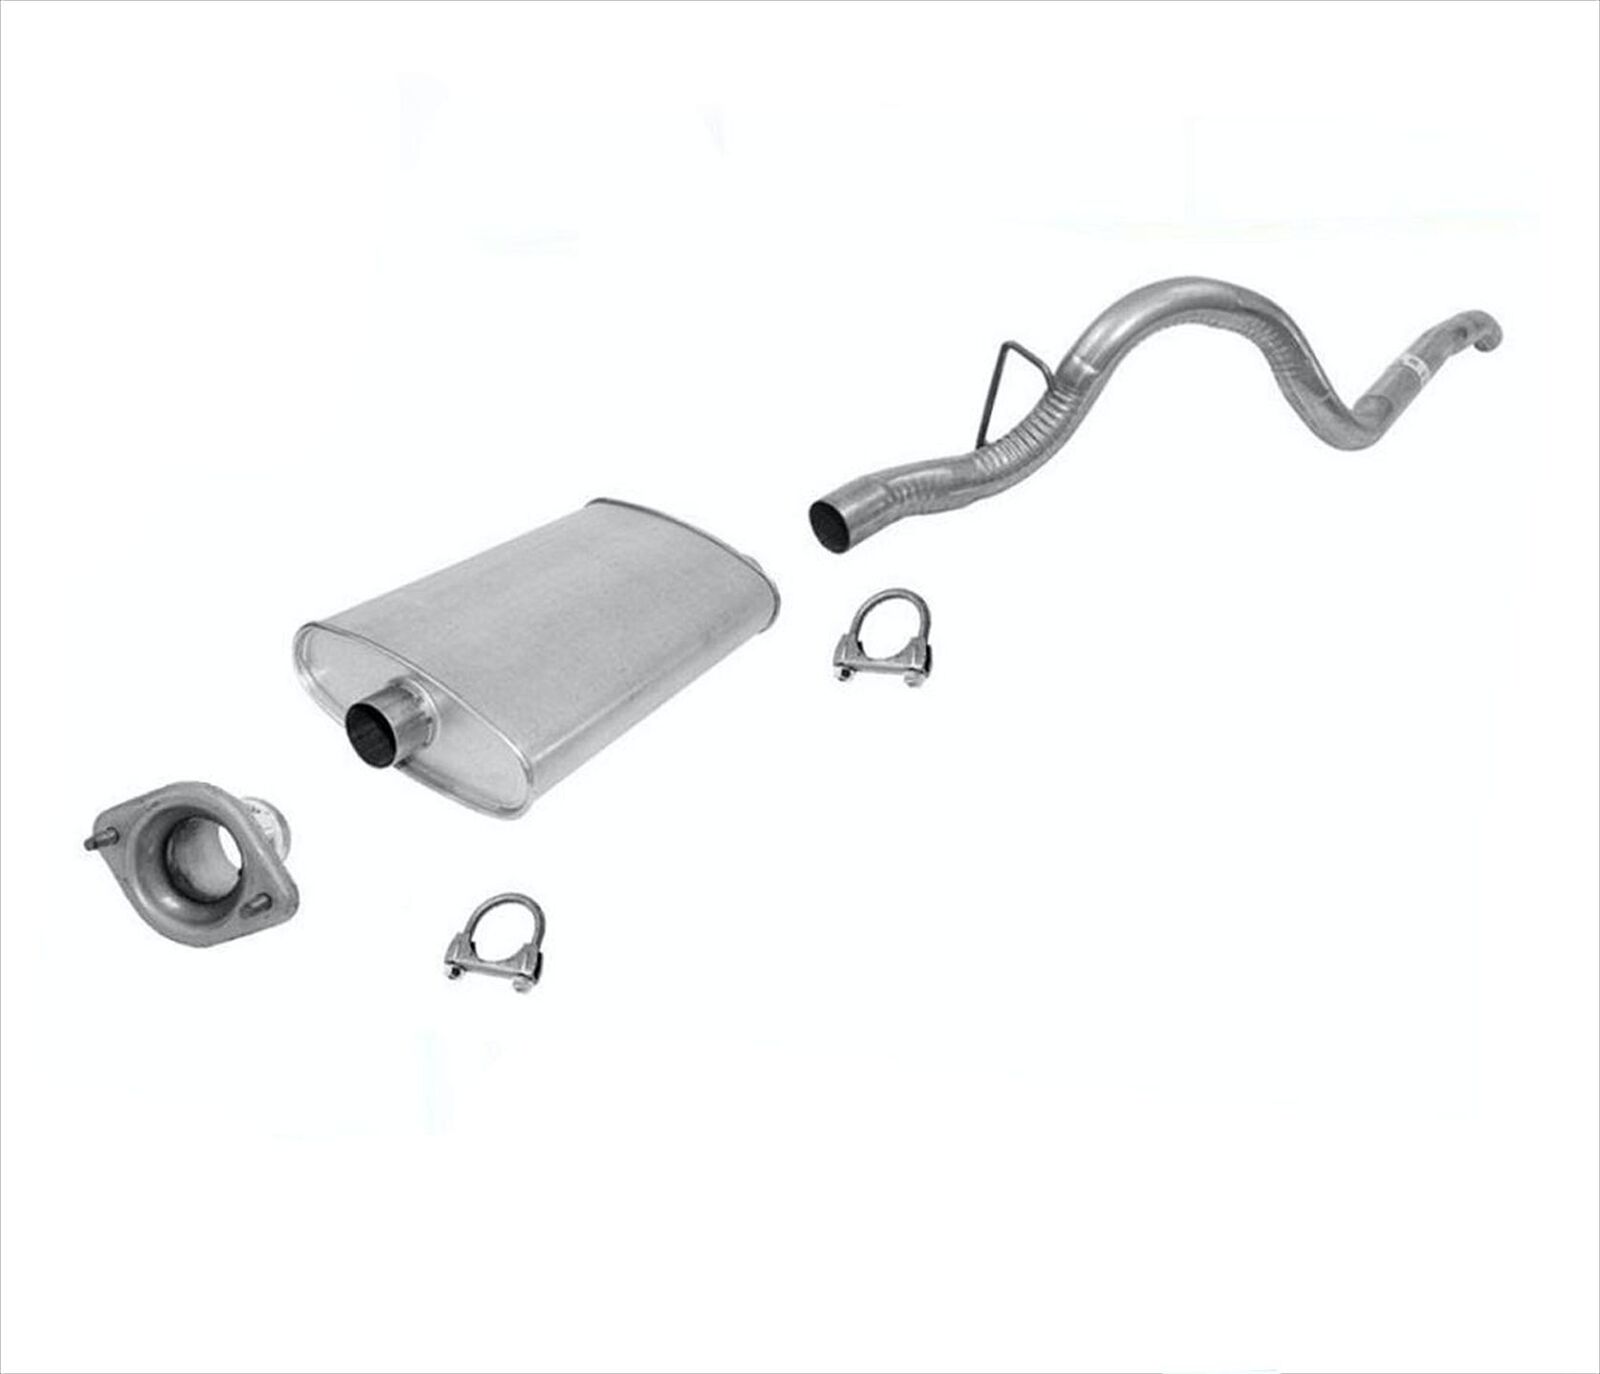 Fits For 2001 Jeep Cherokee With A Flange Inlet Muffler Tail Pipe Exhaust System